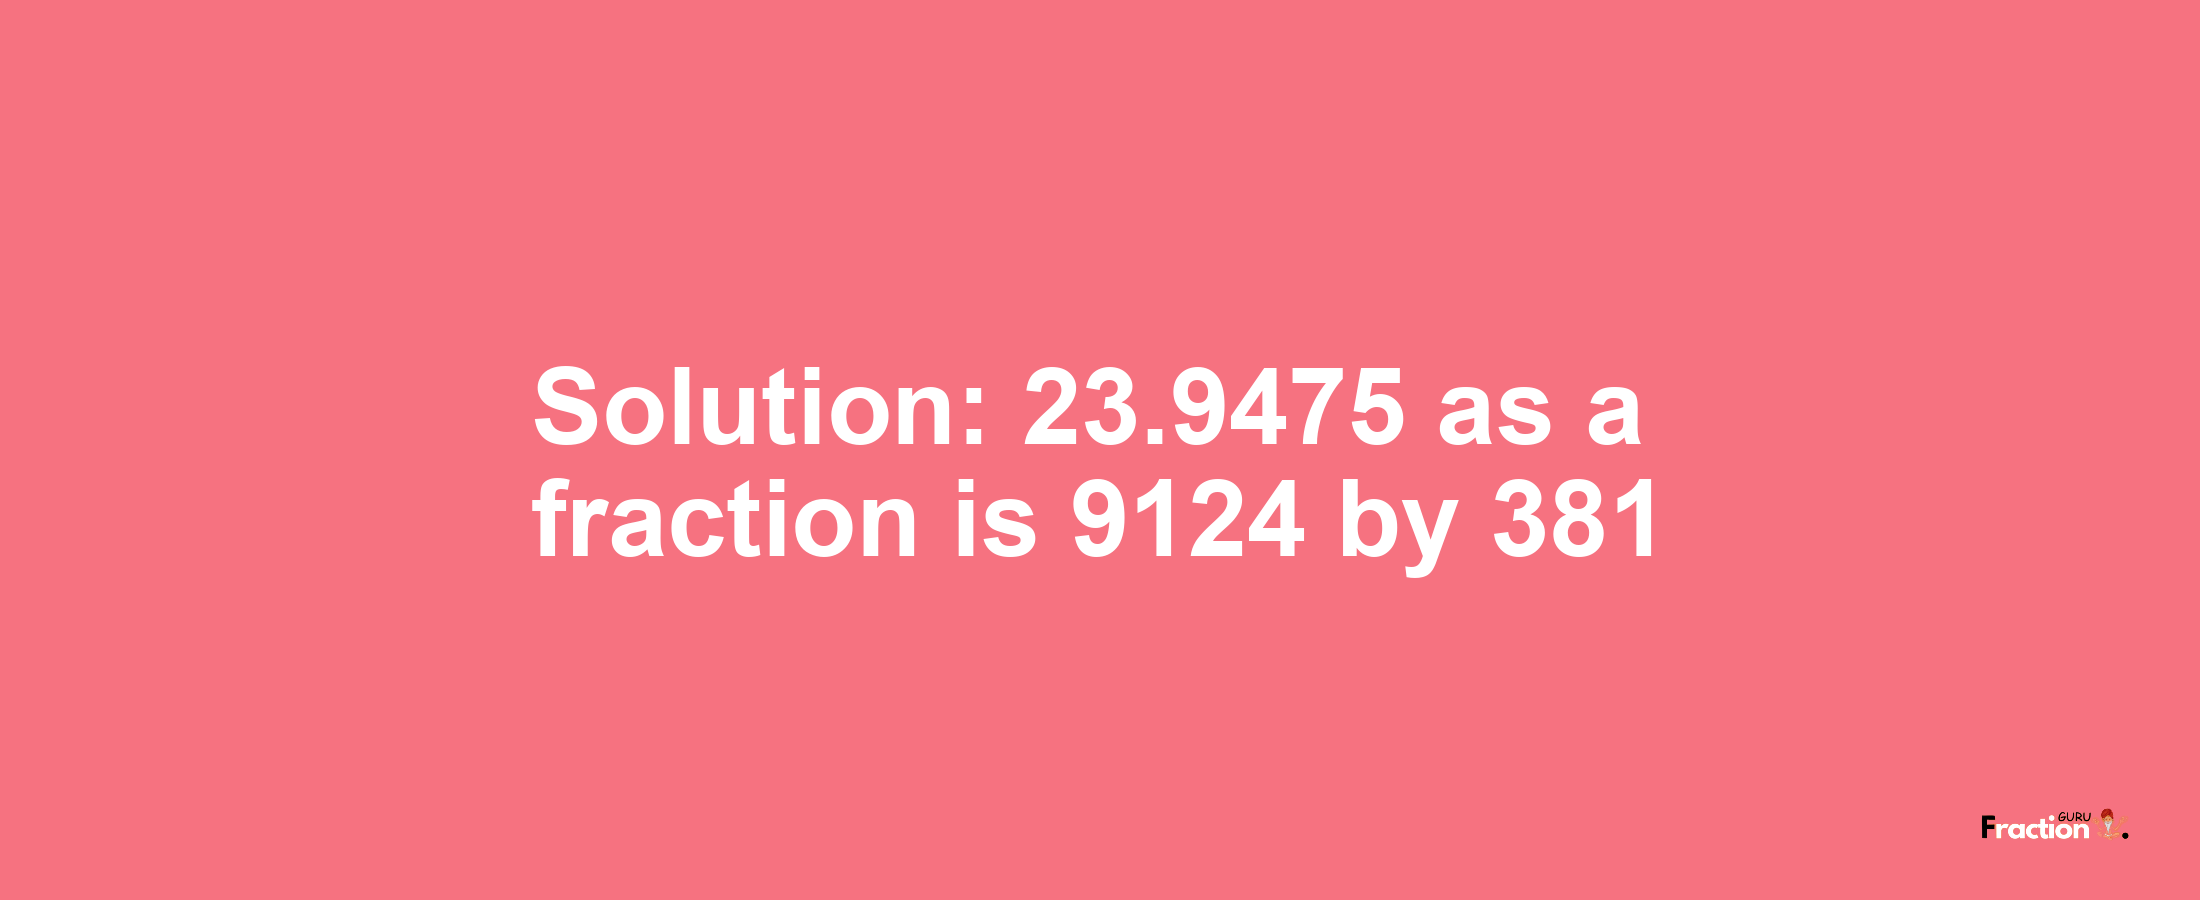 Solution:23.9475 as a fraction is 9124/381